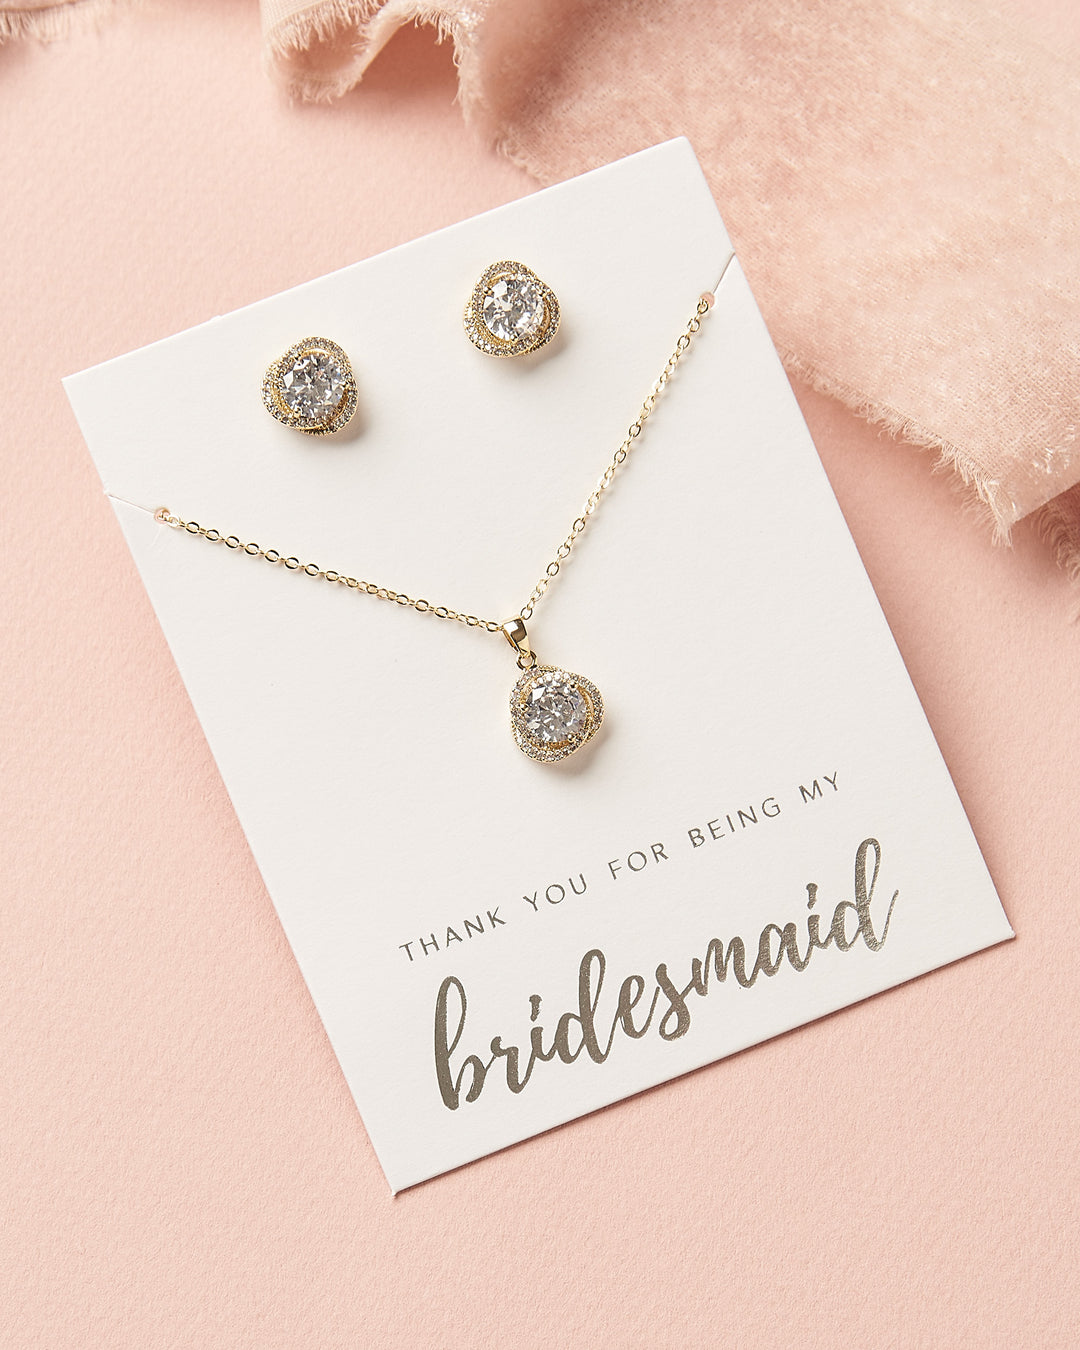 Mystery Bridesmaid Bag - Gold (5 Jewelry Sets)